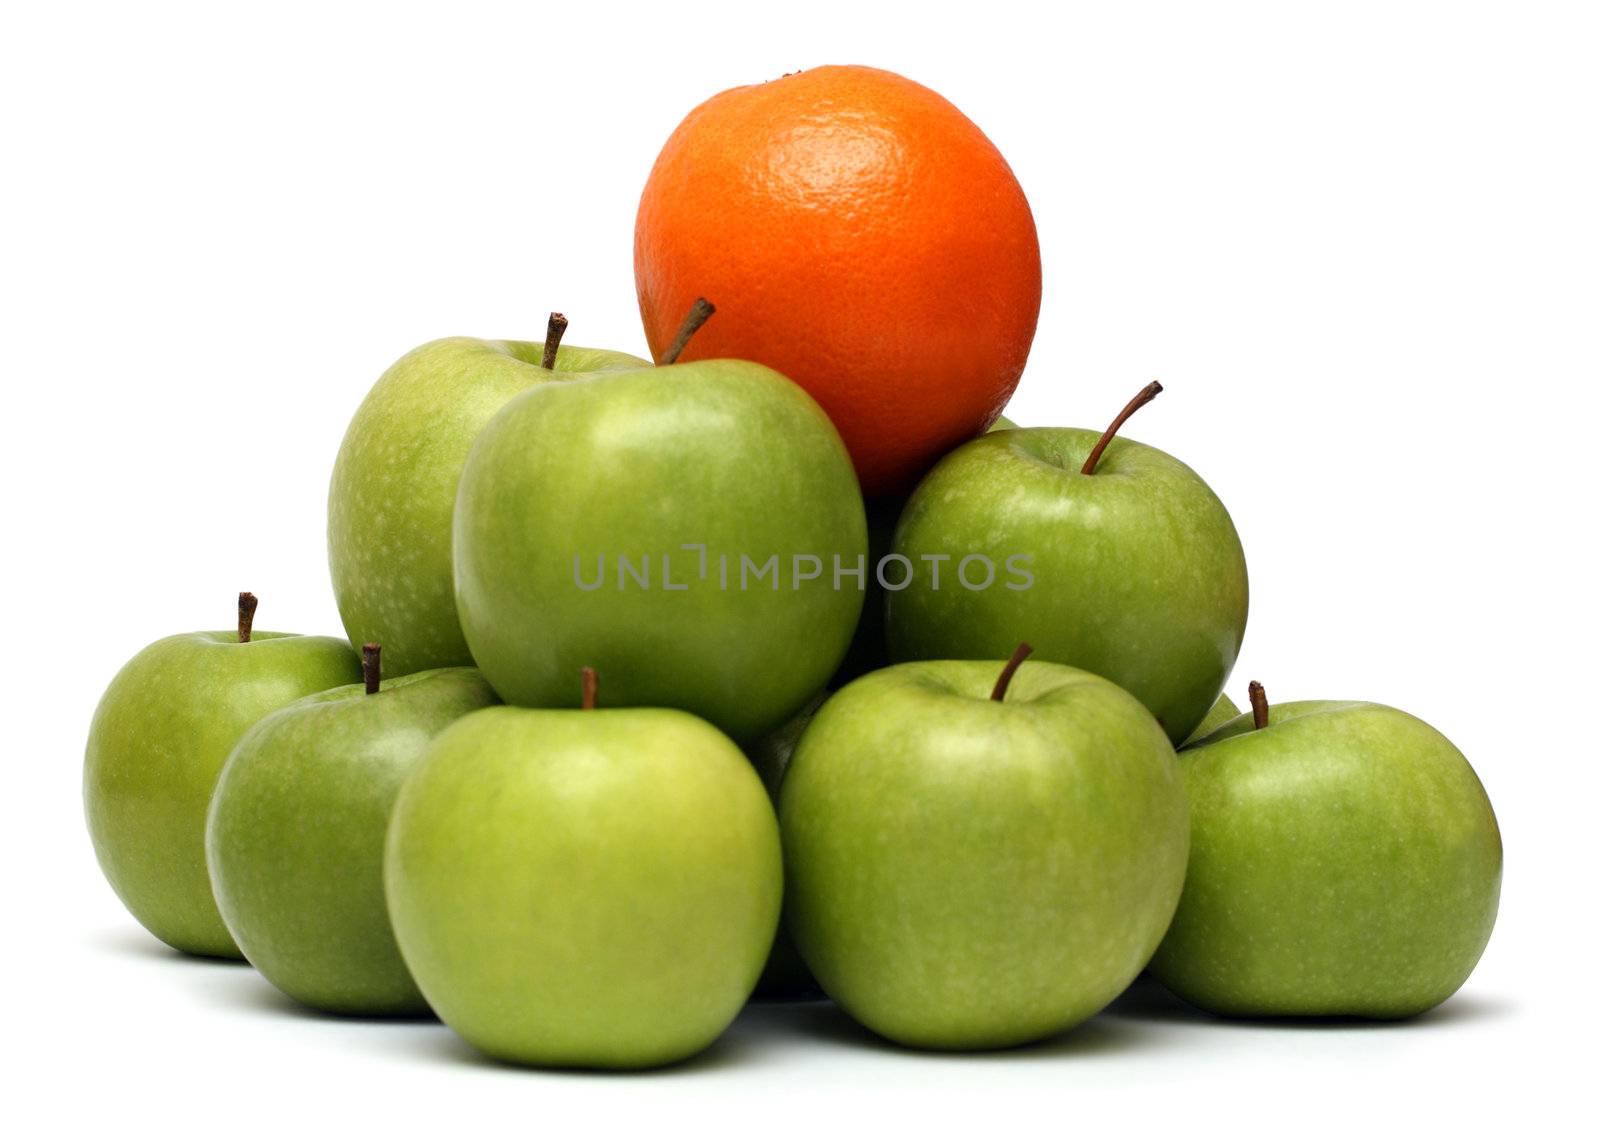 domination concepts - orange on pyramyd of green apples